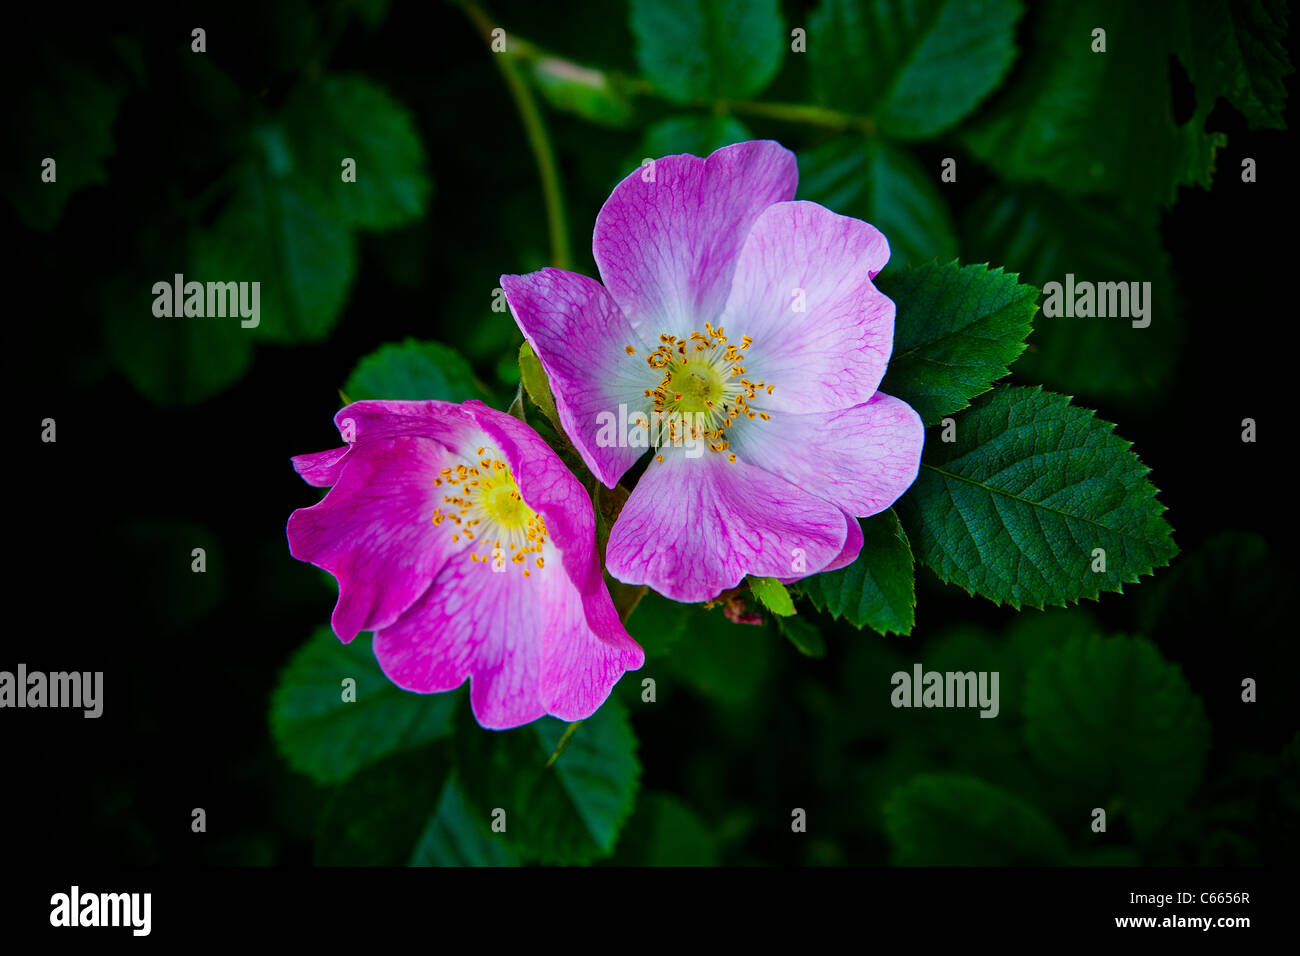 Close up picture of two wild dog rose flowers Stock Photo